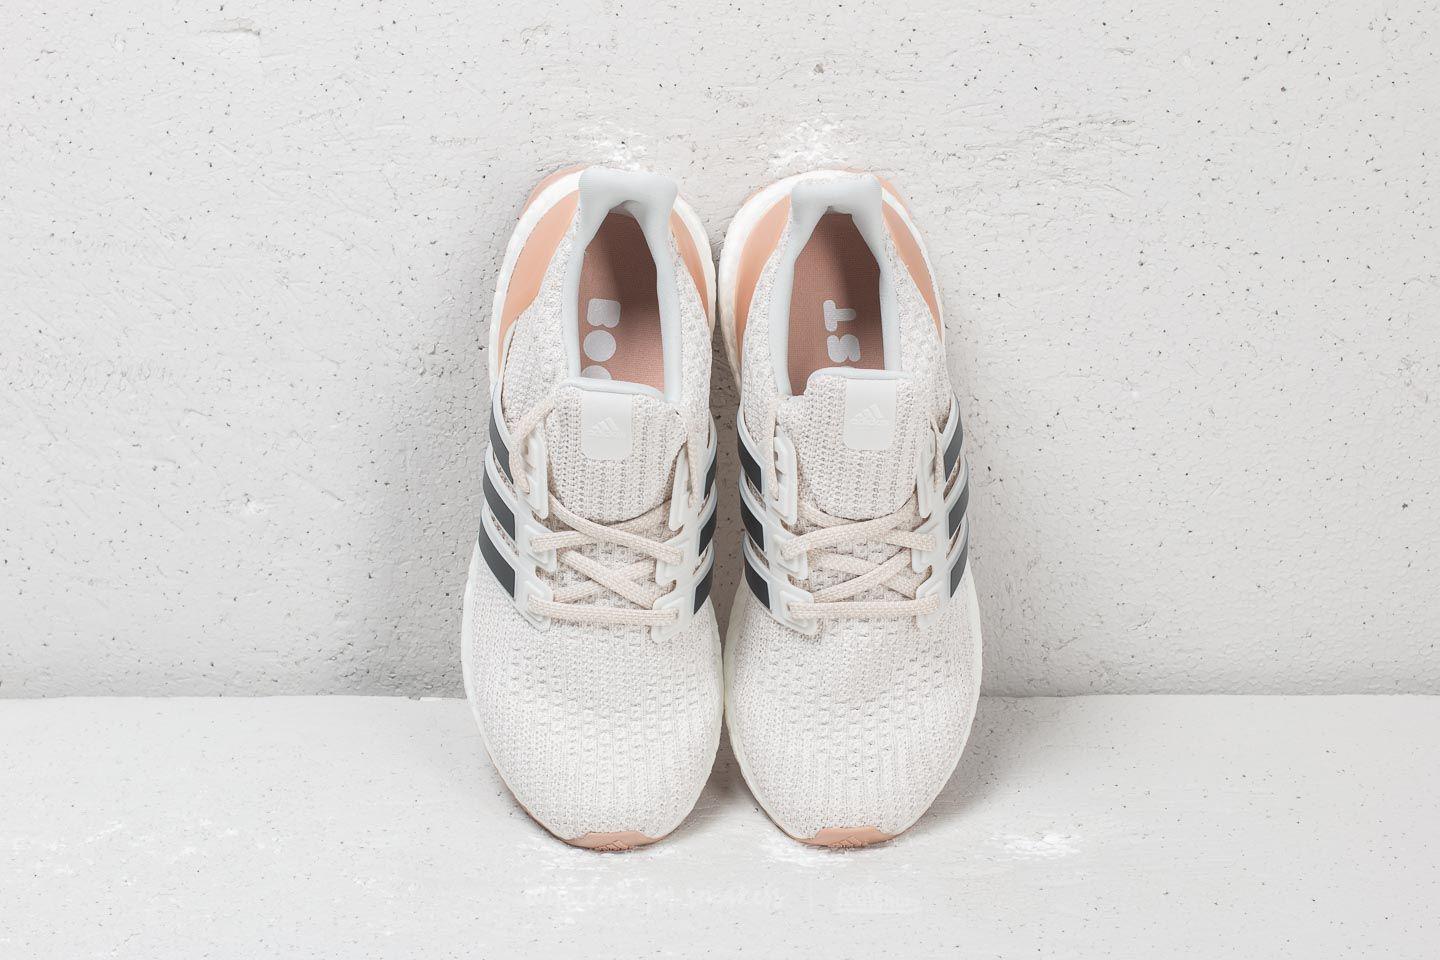 cloud white carbon ultra boost